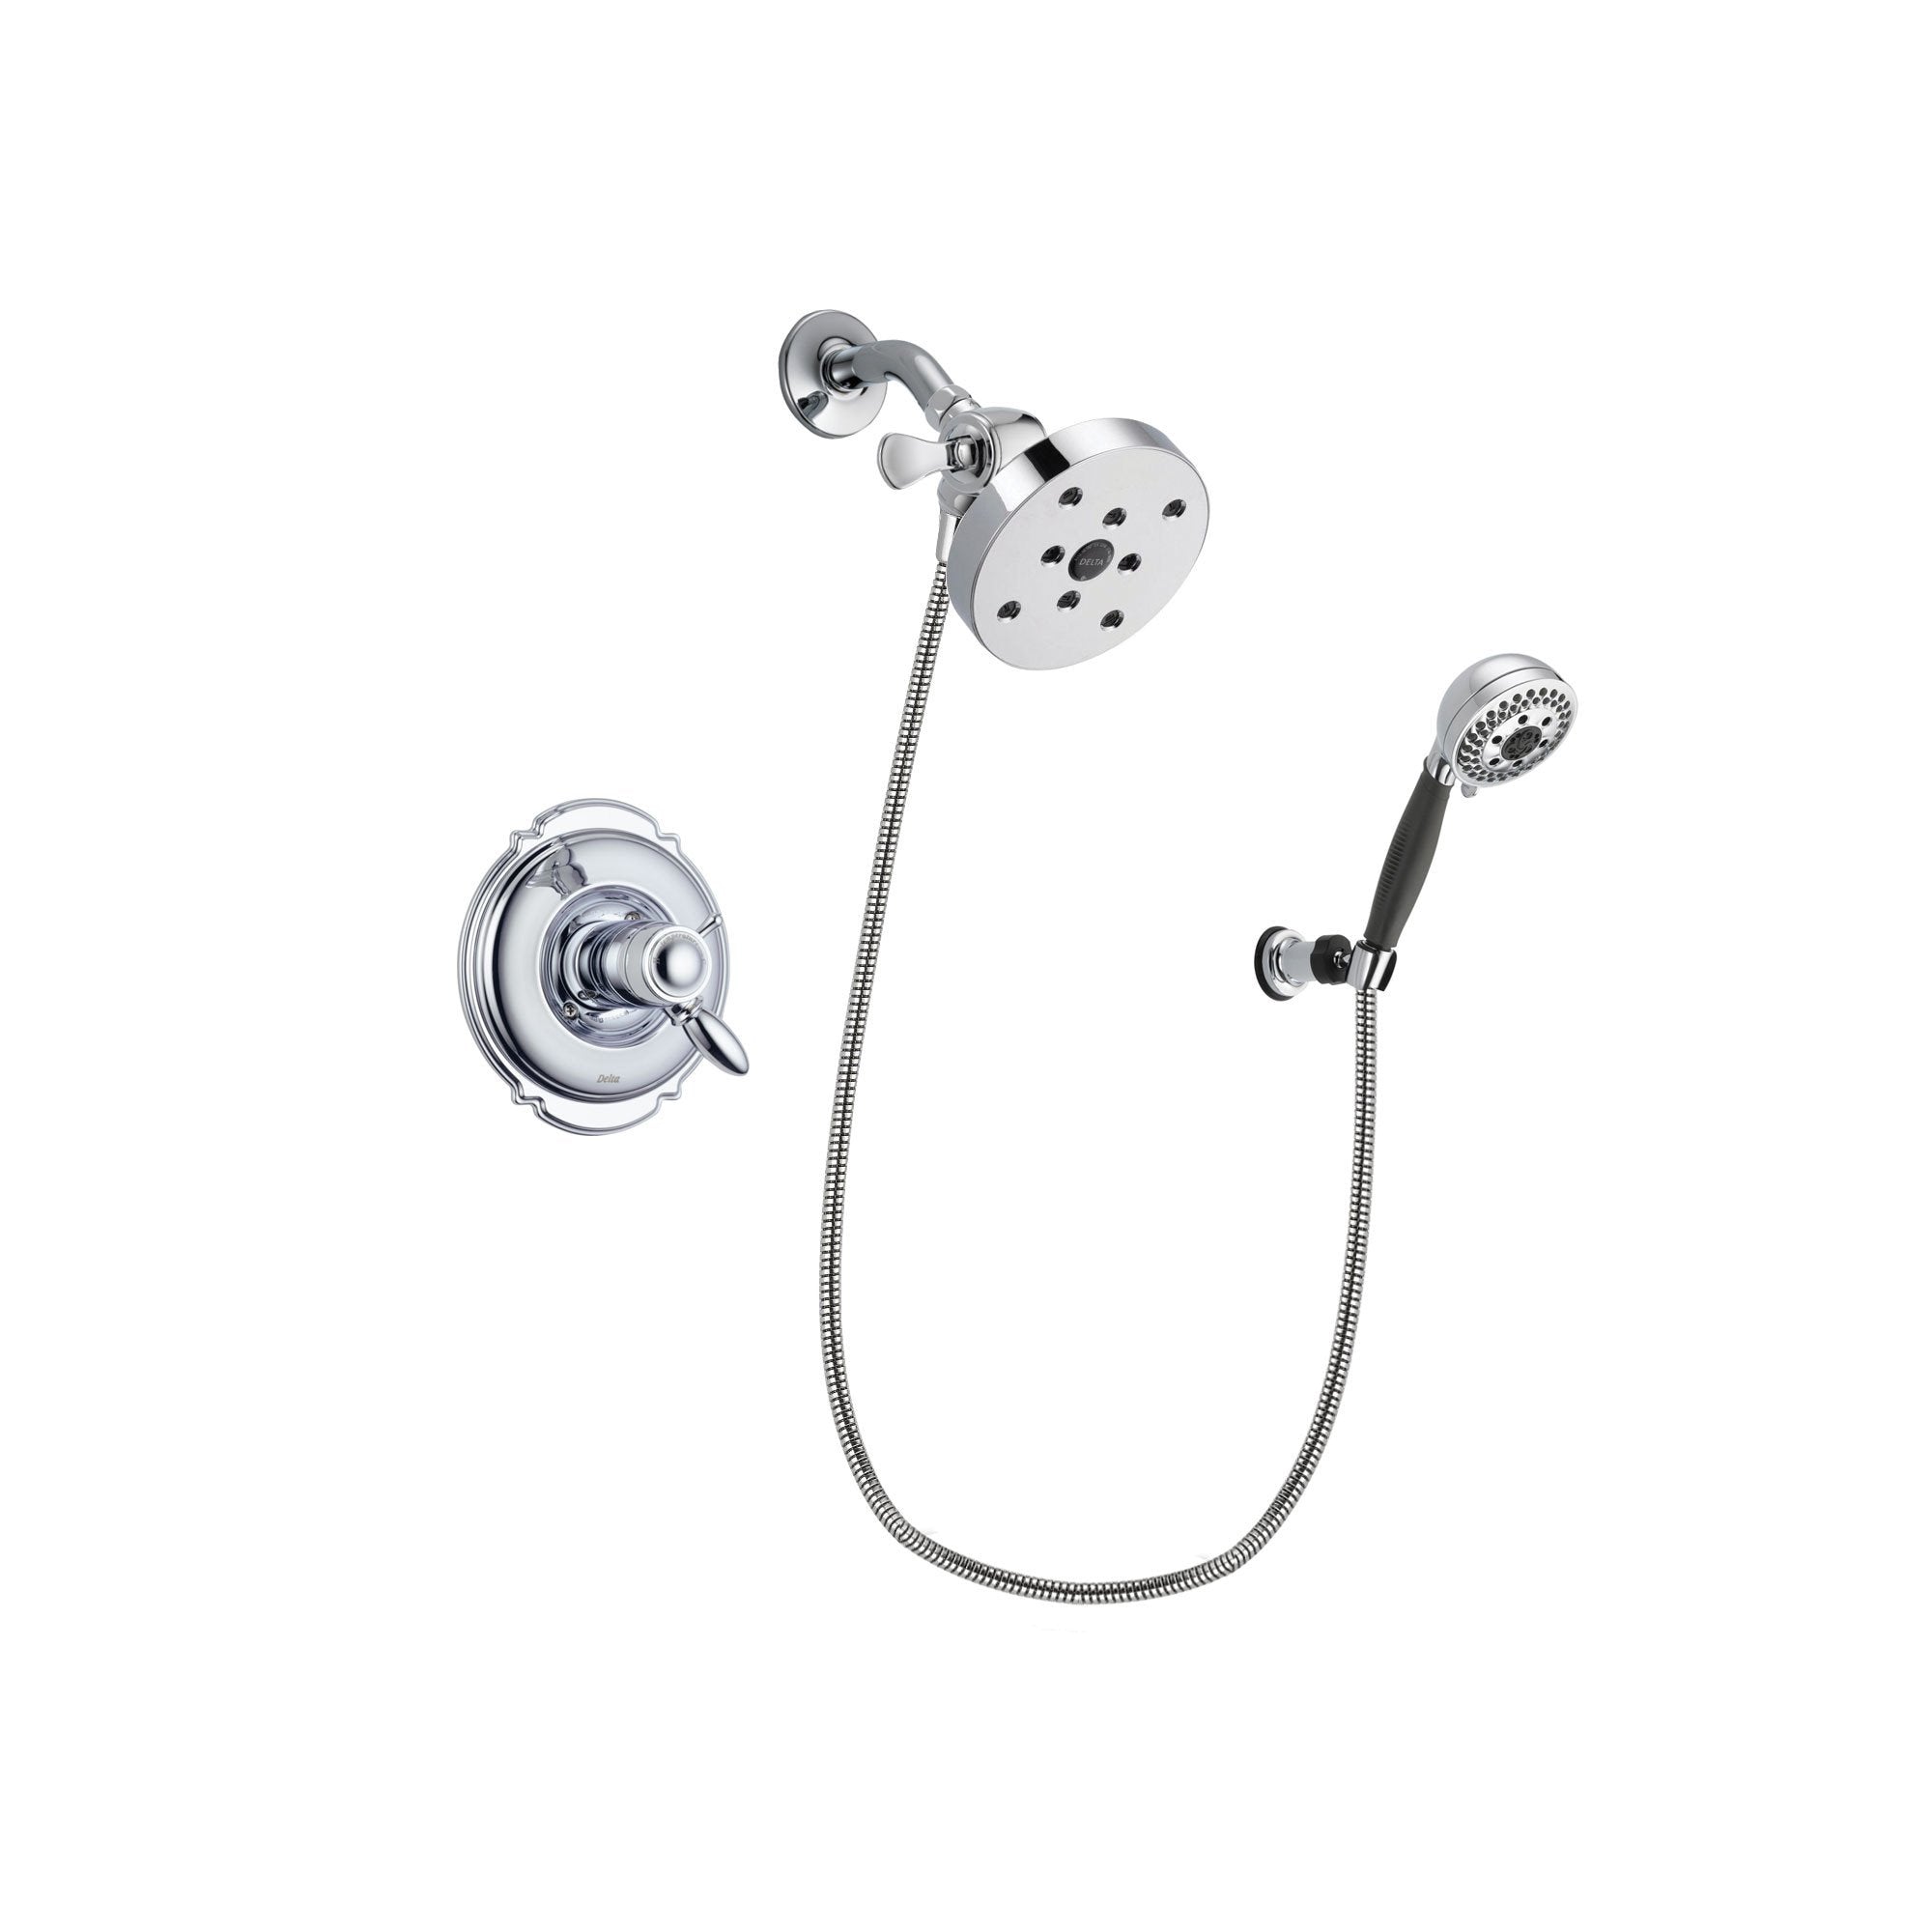 Delta Victorian Chrome Shower Faucet System Package with Hand Shower DSP1210V